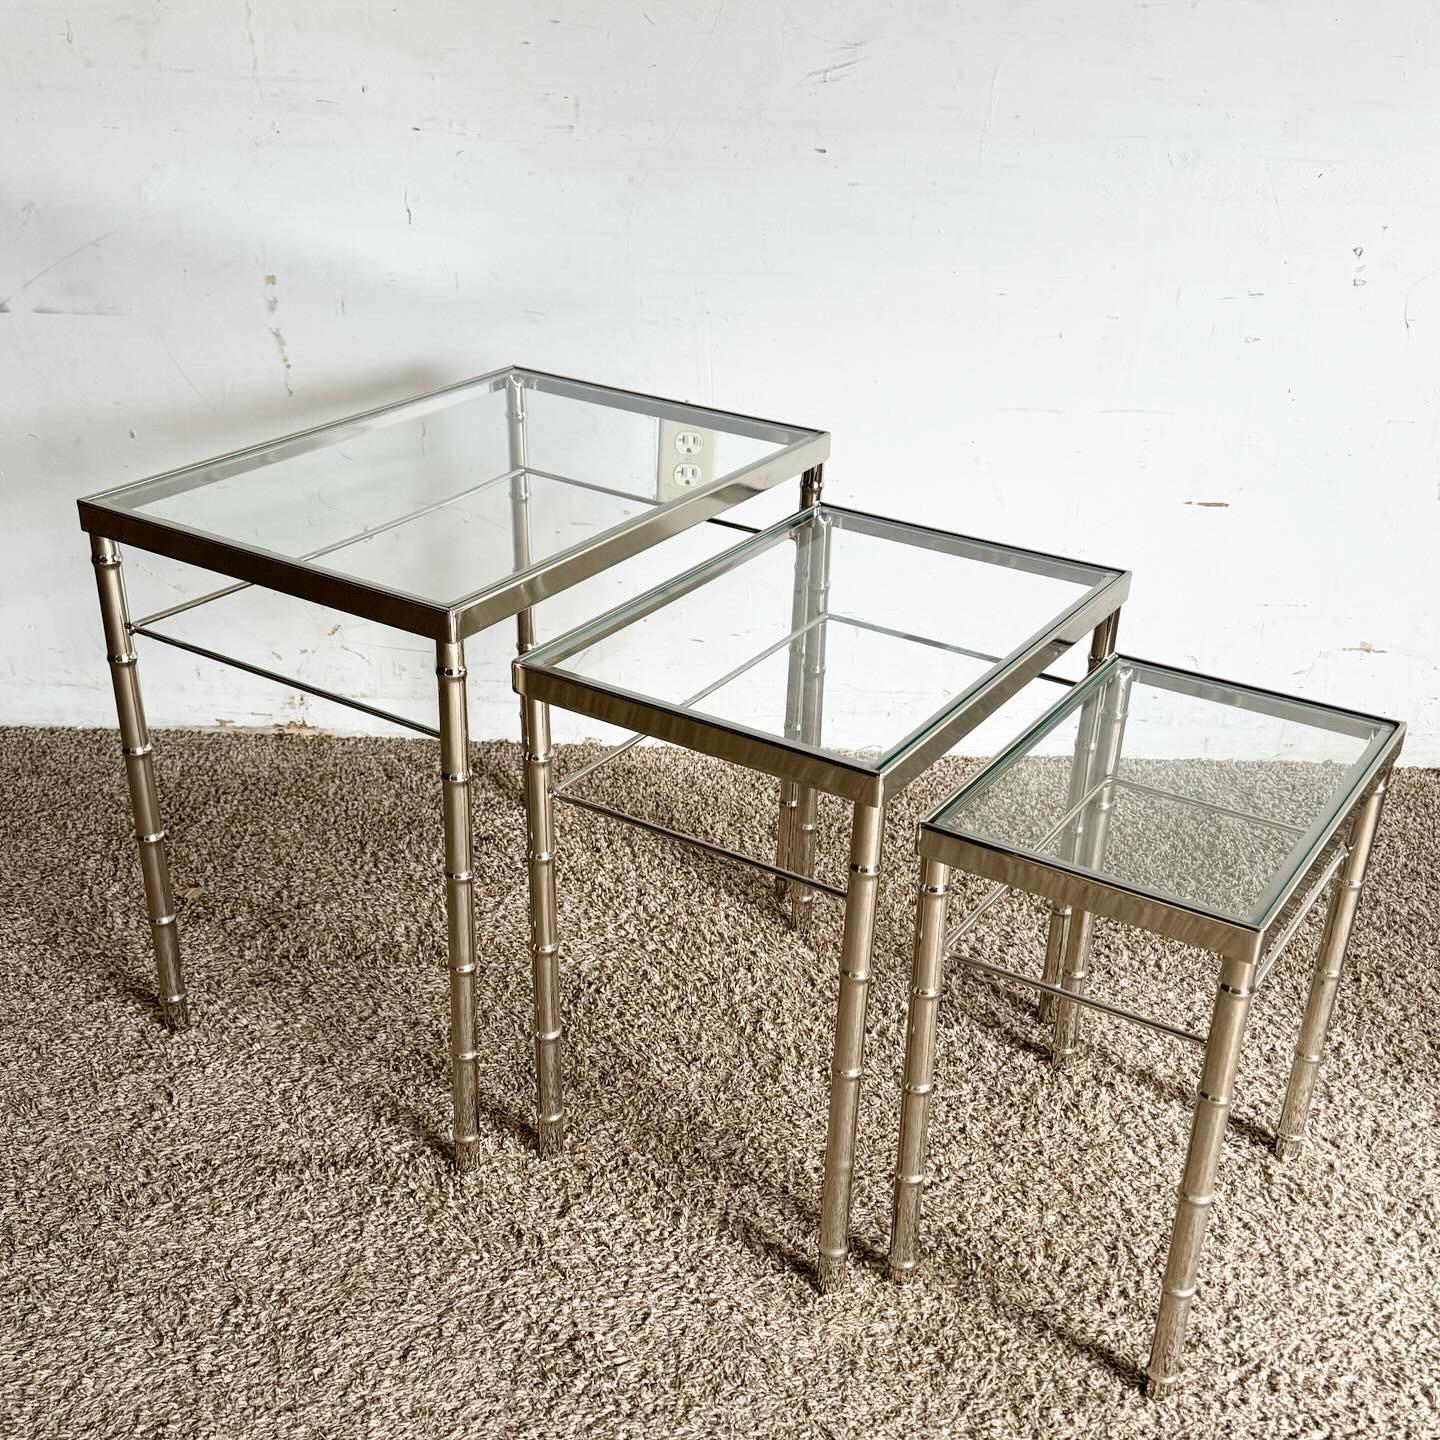 Mid Century Modern Chrome Faux Bamboo Glass Top Nesting Tables - Set of 3 In Good Condition For Sale In Delray Beach, FL